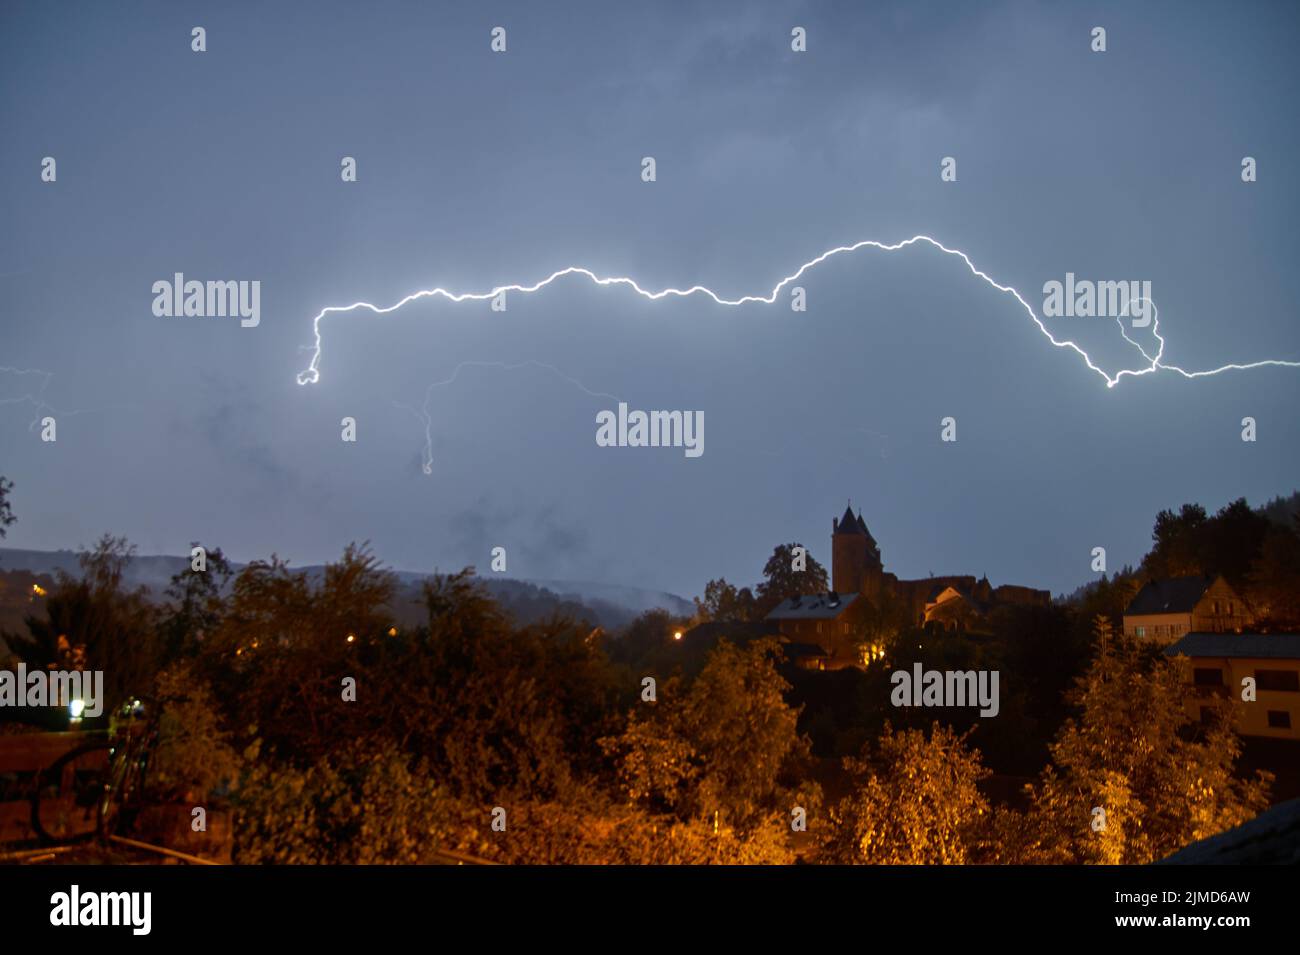 Castle photographed during a thunderstorm with lightning at night in Germany Stock Photo